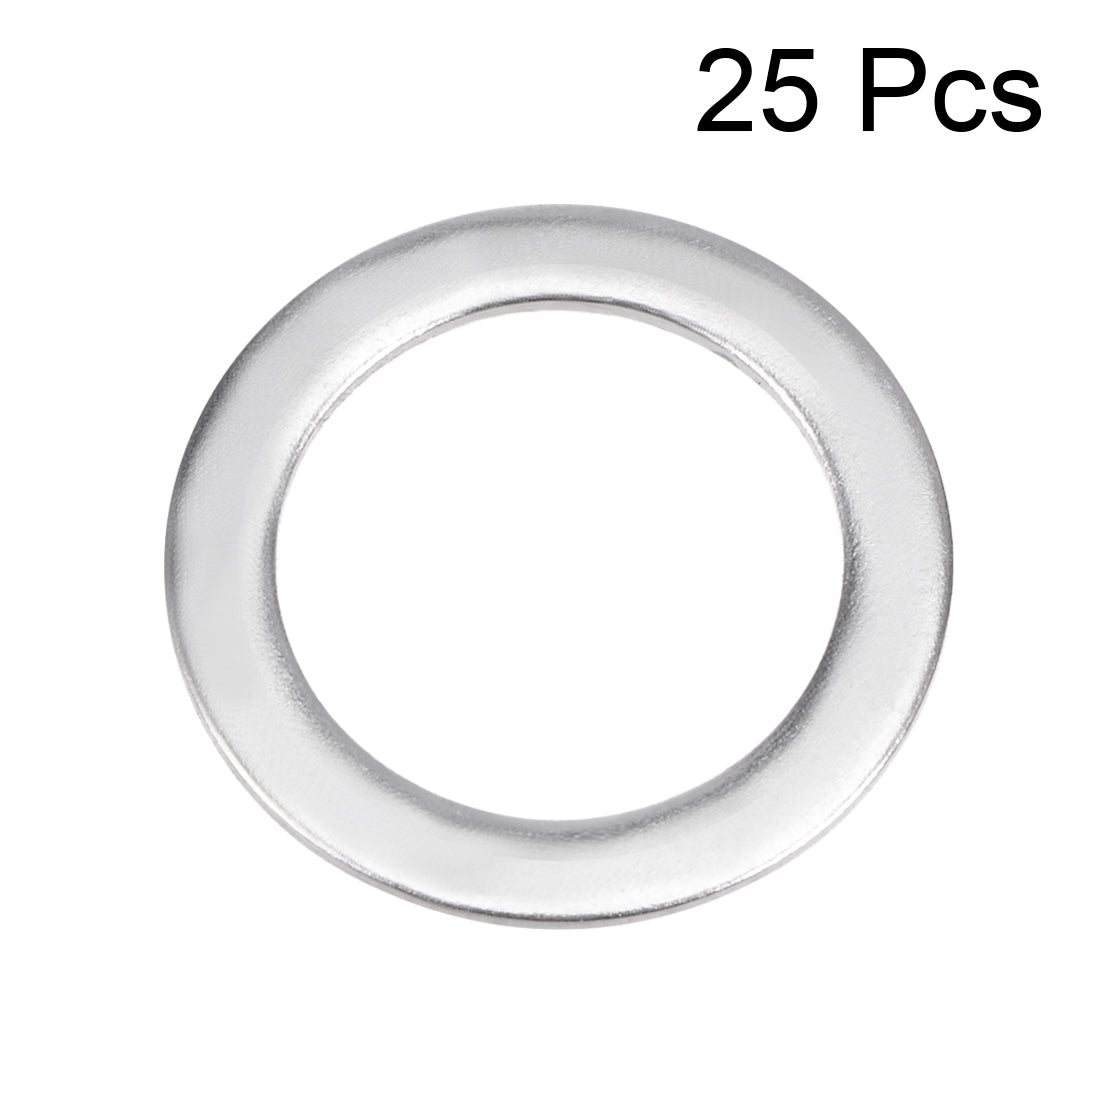 uxcell Uxcell 25 Pcs 16.5mm x 22mm x 0.8mm 304 Stainless Steel Flat Washer for Screw Bolt